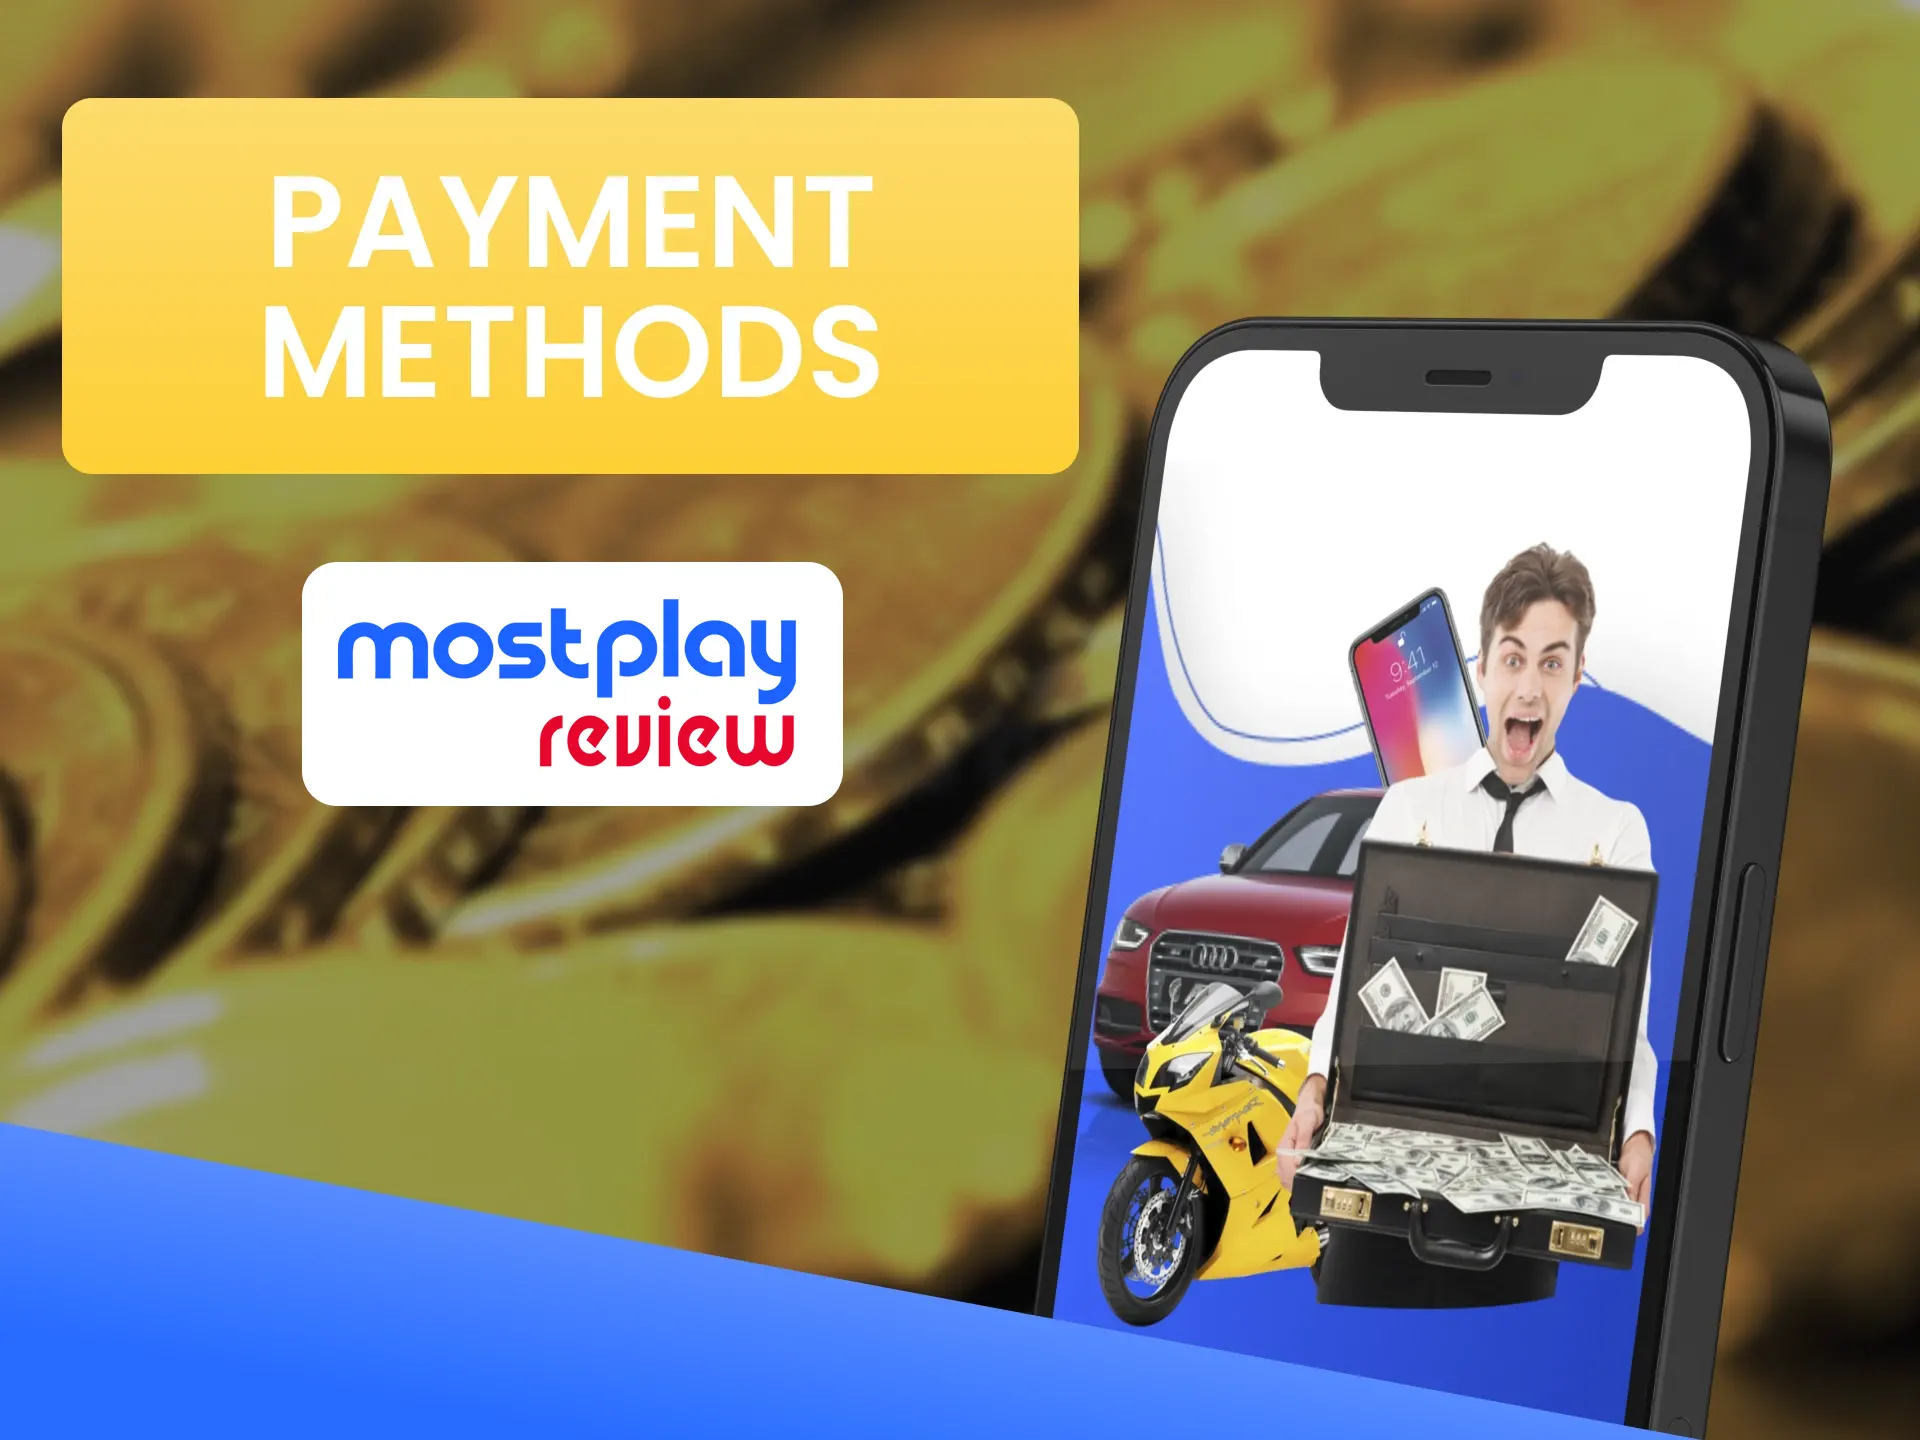 The Mostplay affiliate program has a large selection of transaction methods.